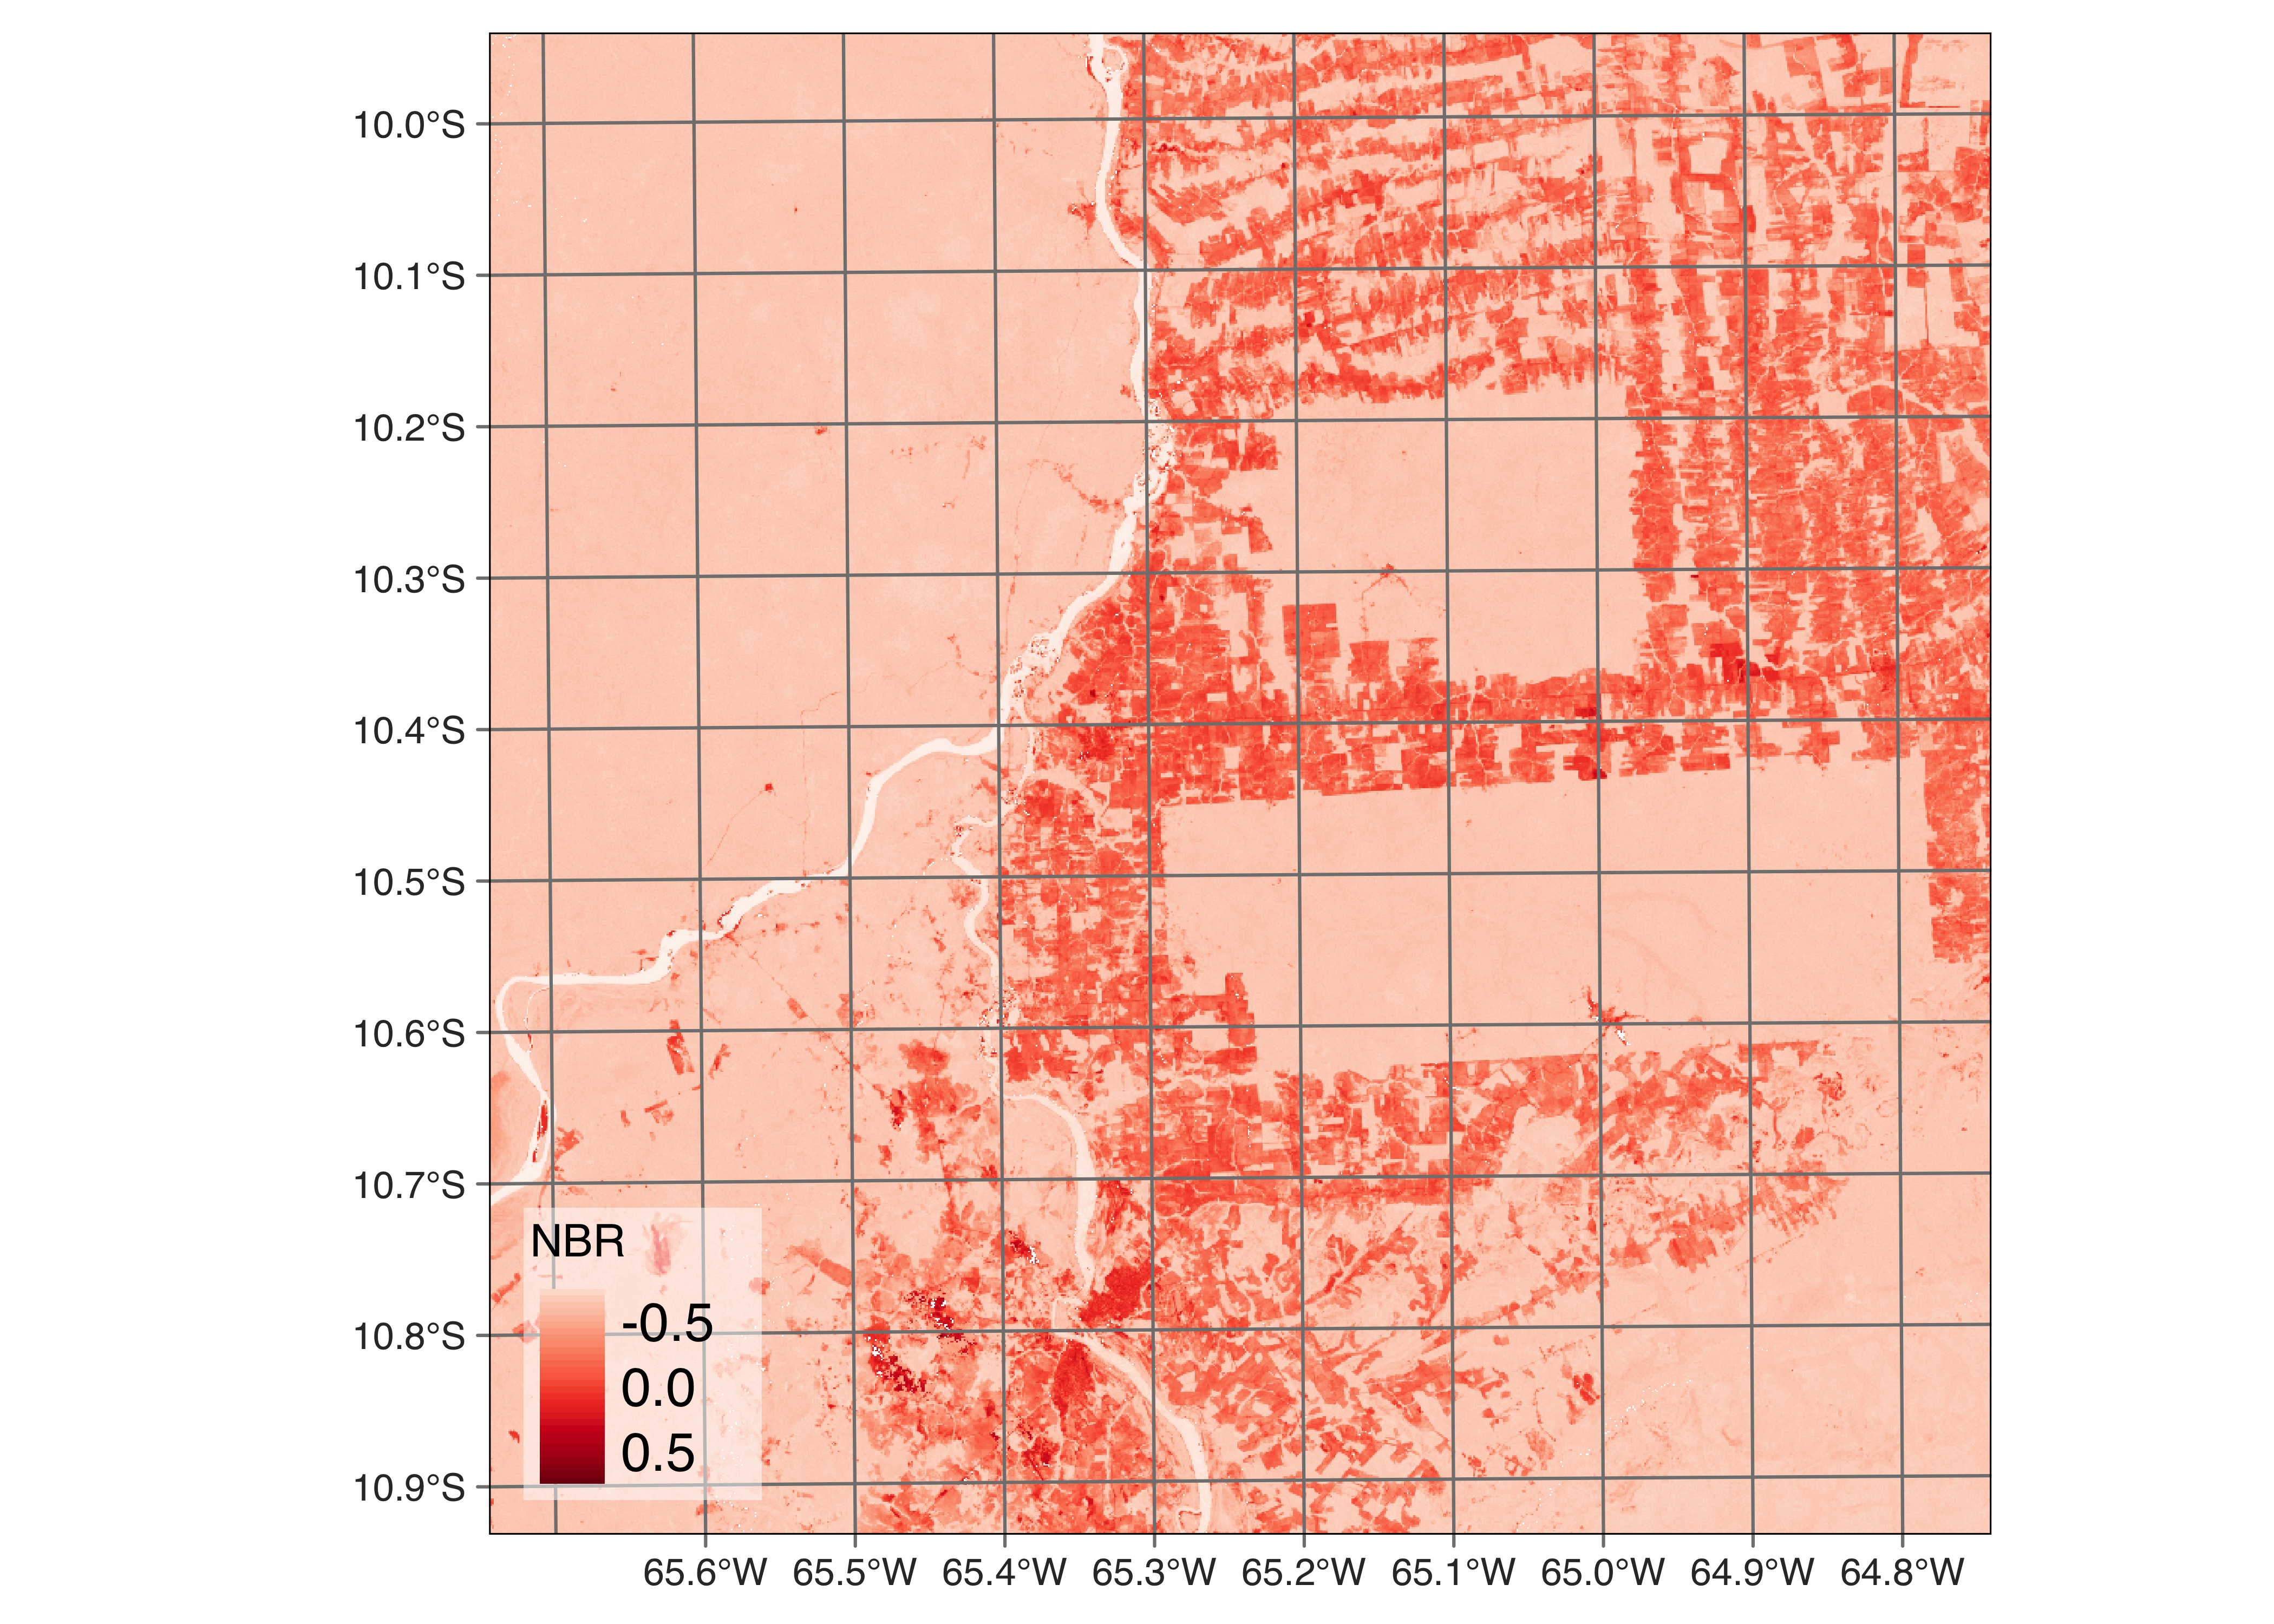 NBR ratio for a regular data cube built using Sentinel-2 tiles and 20LKP and 20LLP (Source: Authors).